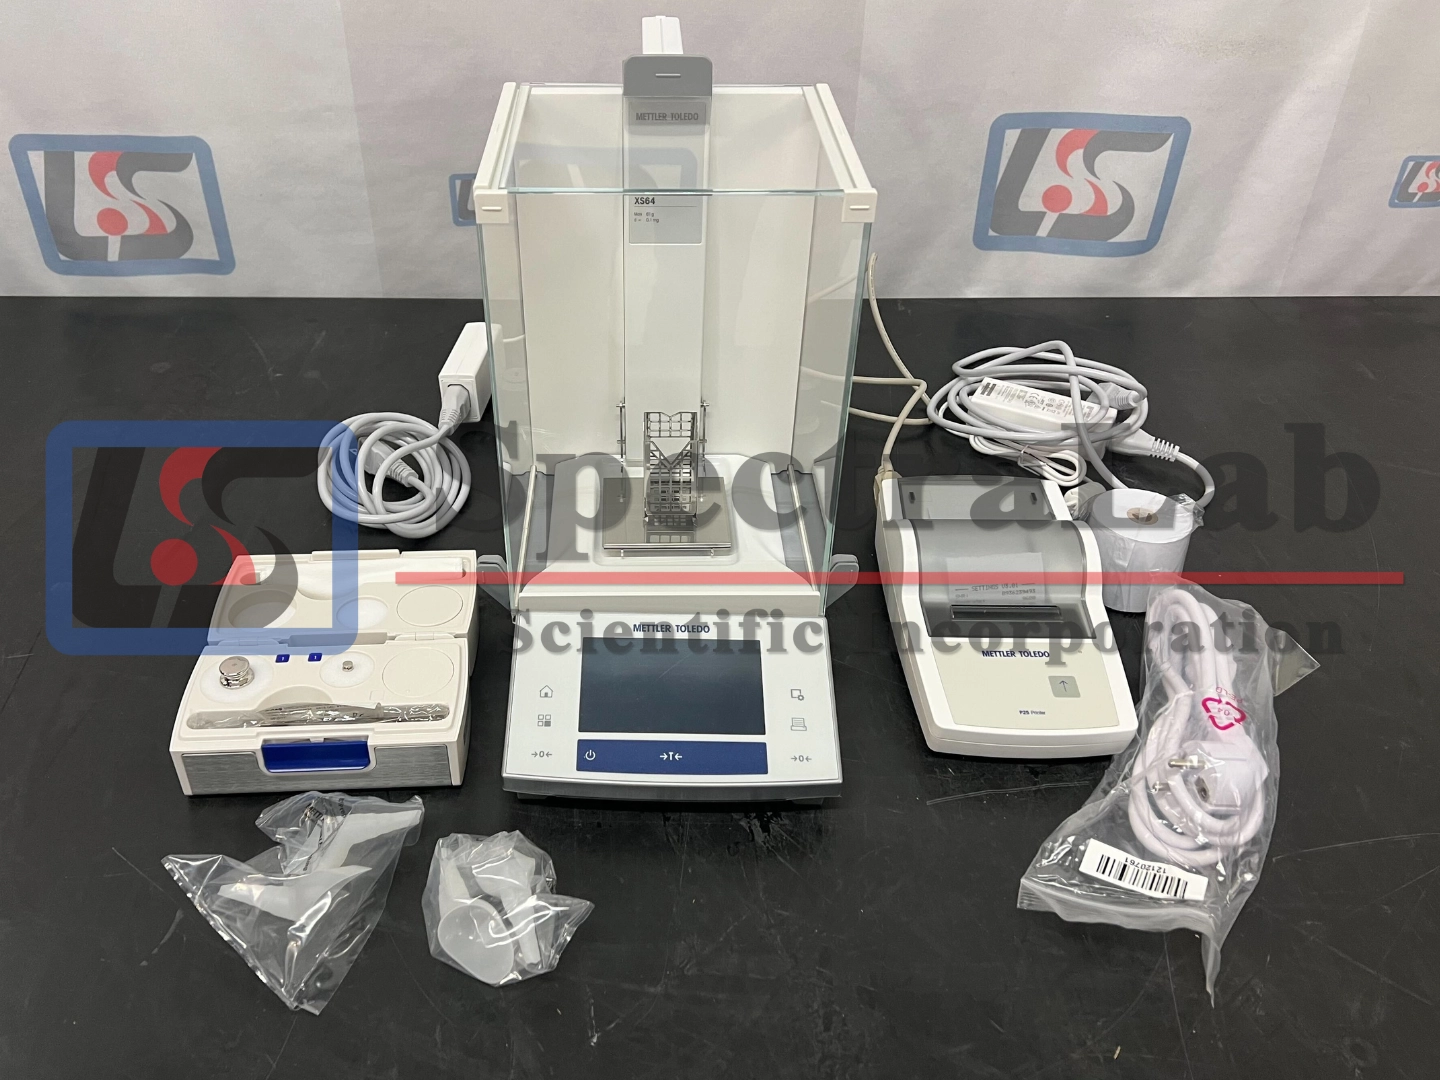 Brand New in Original Package Mettler Toledo XS64 Balance w/ RS P25 Printer and CPS CarePac S Weight Set